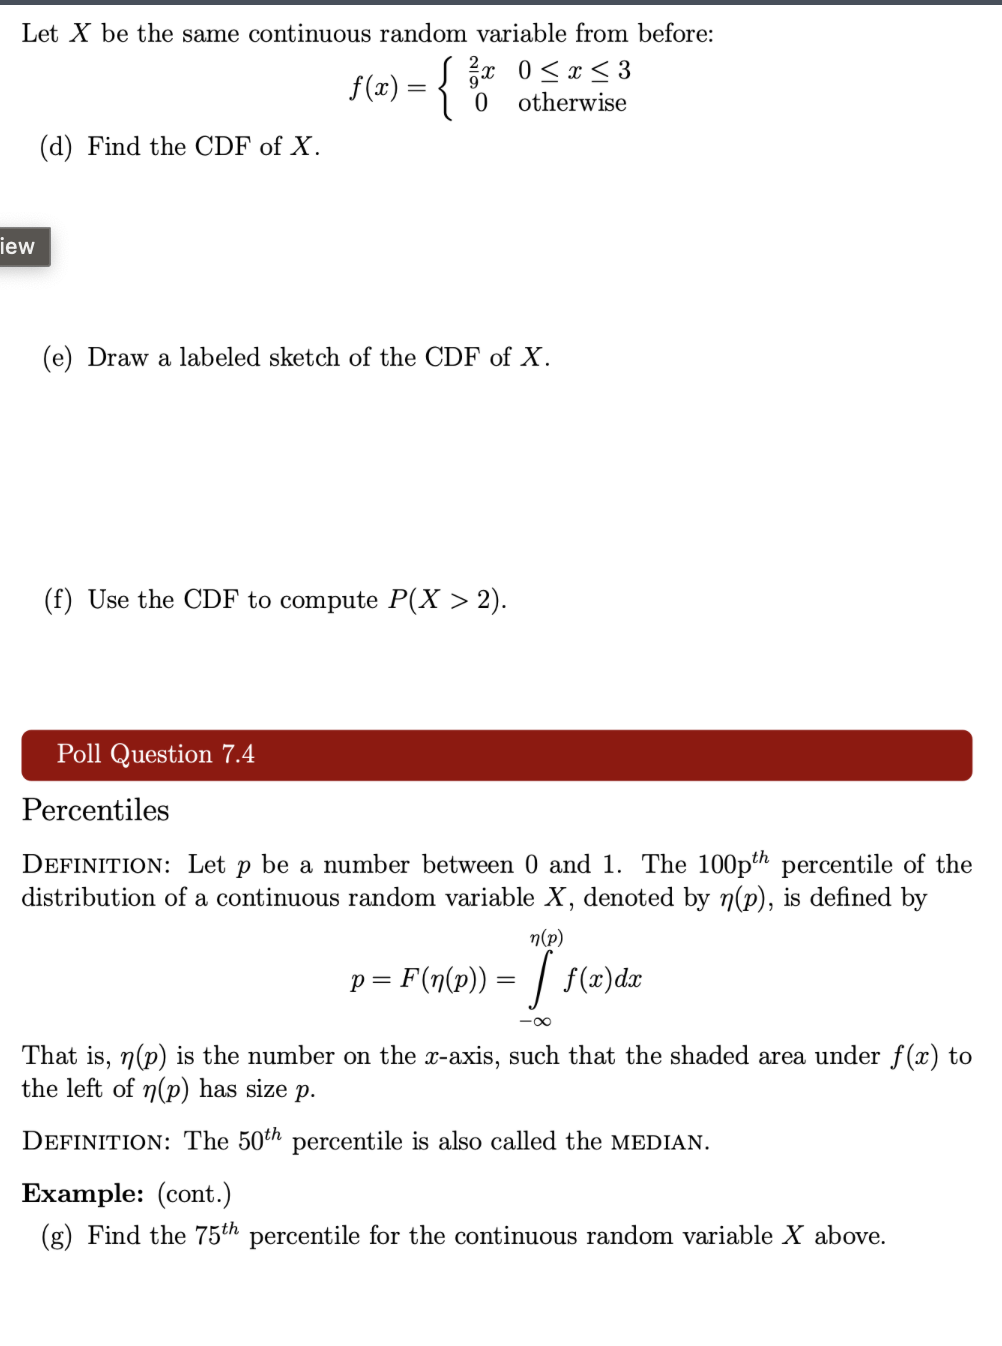 iew
Let X be the same continuous random variable from before:
f ( x ) = { 3 x 0 ≤ x ≤ 3
0 otherwise
(d) Find the CDF of X.
(e) Draw a labeled sketch of the CDF of X.
(f) Use the CDF to compute P(X > 2).
Poll Question 7.4
Percentiles
DEFINITION: Let p be a number between 0 and 1. The 100th percentile of the
distribution of a continuous random variable X, denoted by n(p), is defined by
n(p)
p = F(n(p)) = [ f(x)dx
x-
That is, n(p) is the number on the x-axis, such that the shaded area under f(x) to
the left of n(p) has size p.
DEFINITION: The 50th percentile is also called the MEDIAN.
Example: (cont.)
(g) Find the 75th percentile for the continuous random variable X above.